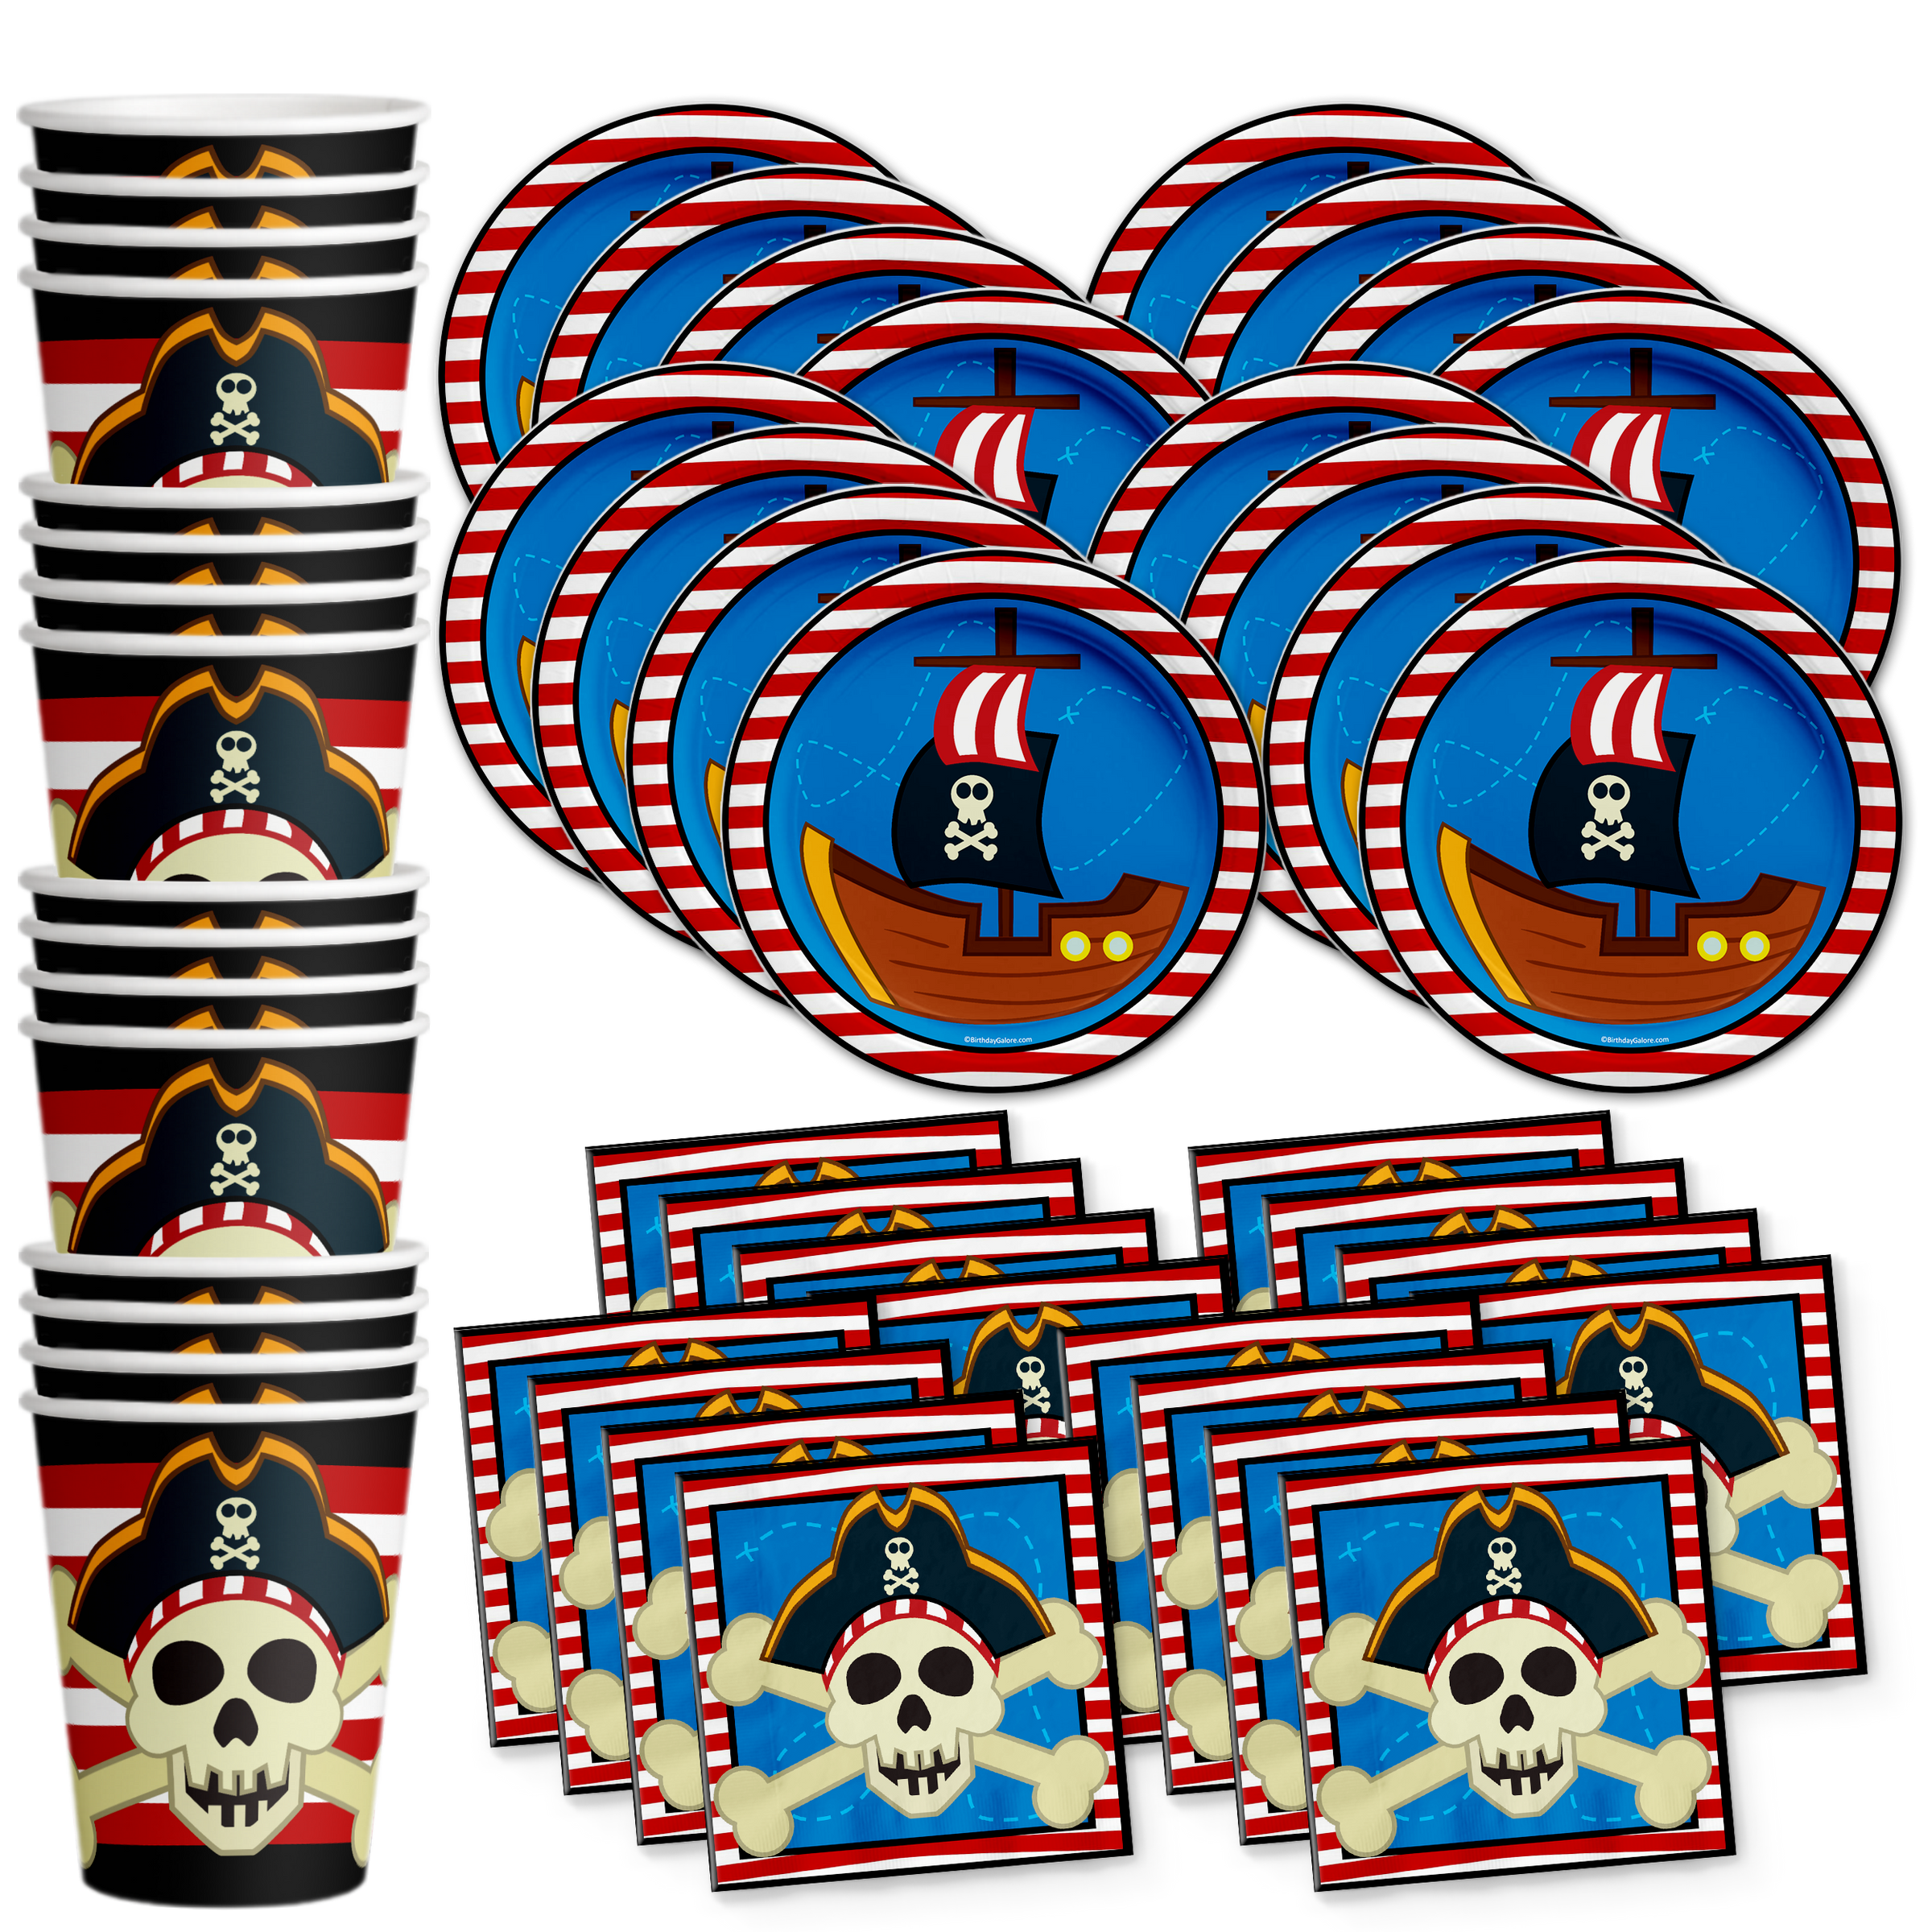 Pirate Ship Birthday Party Tableware Kit For 16 Guests - BirthdayGalore.com